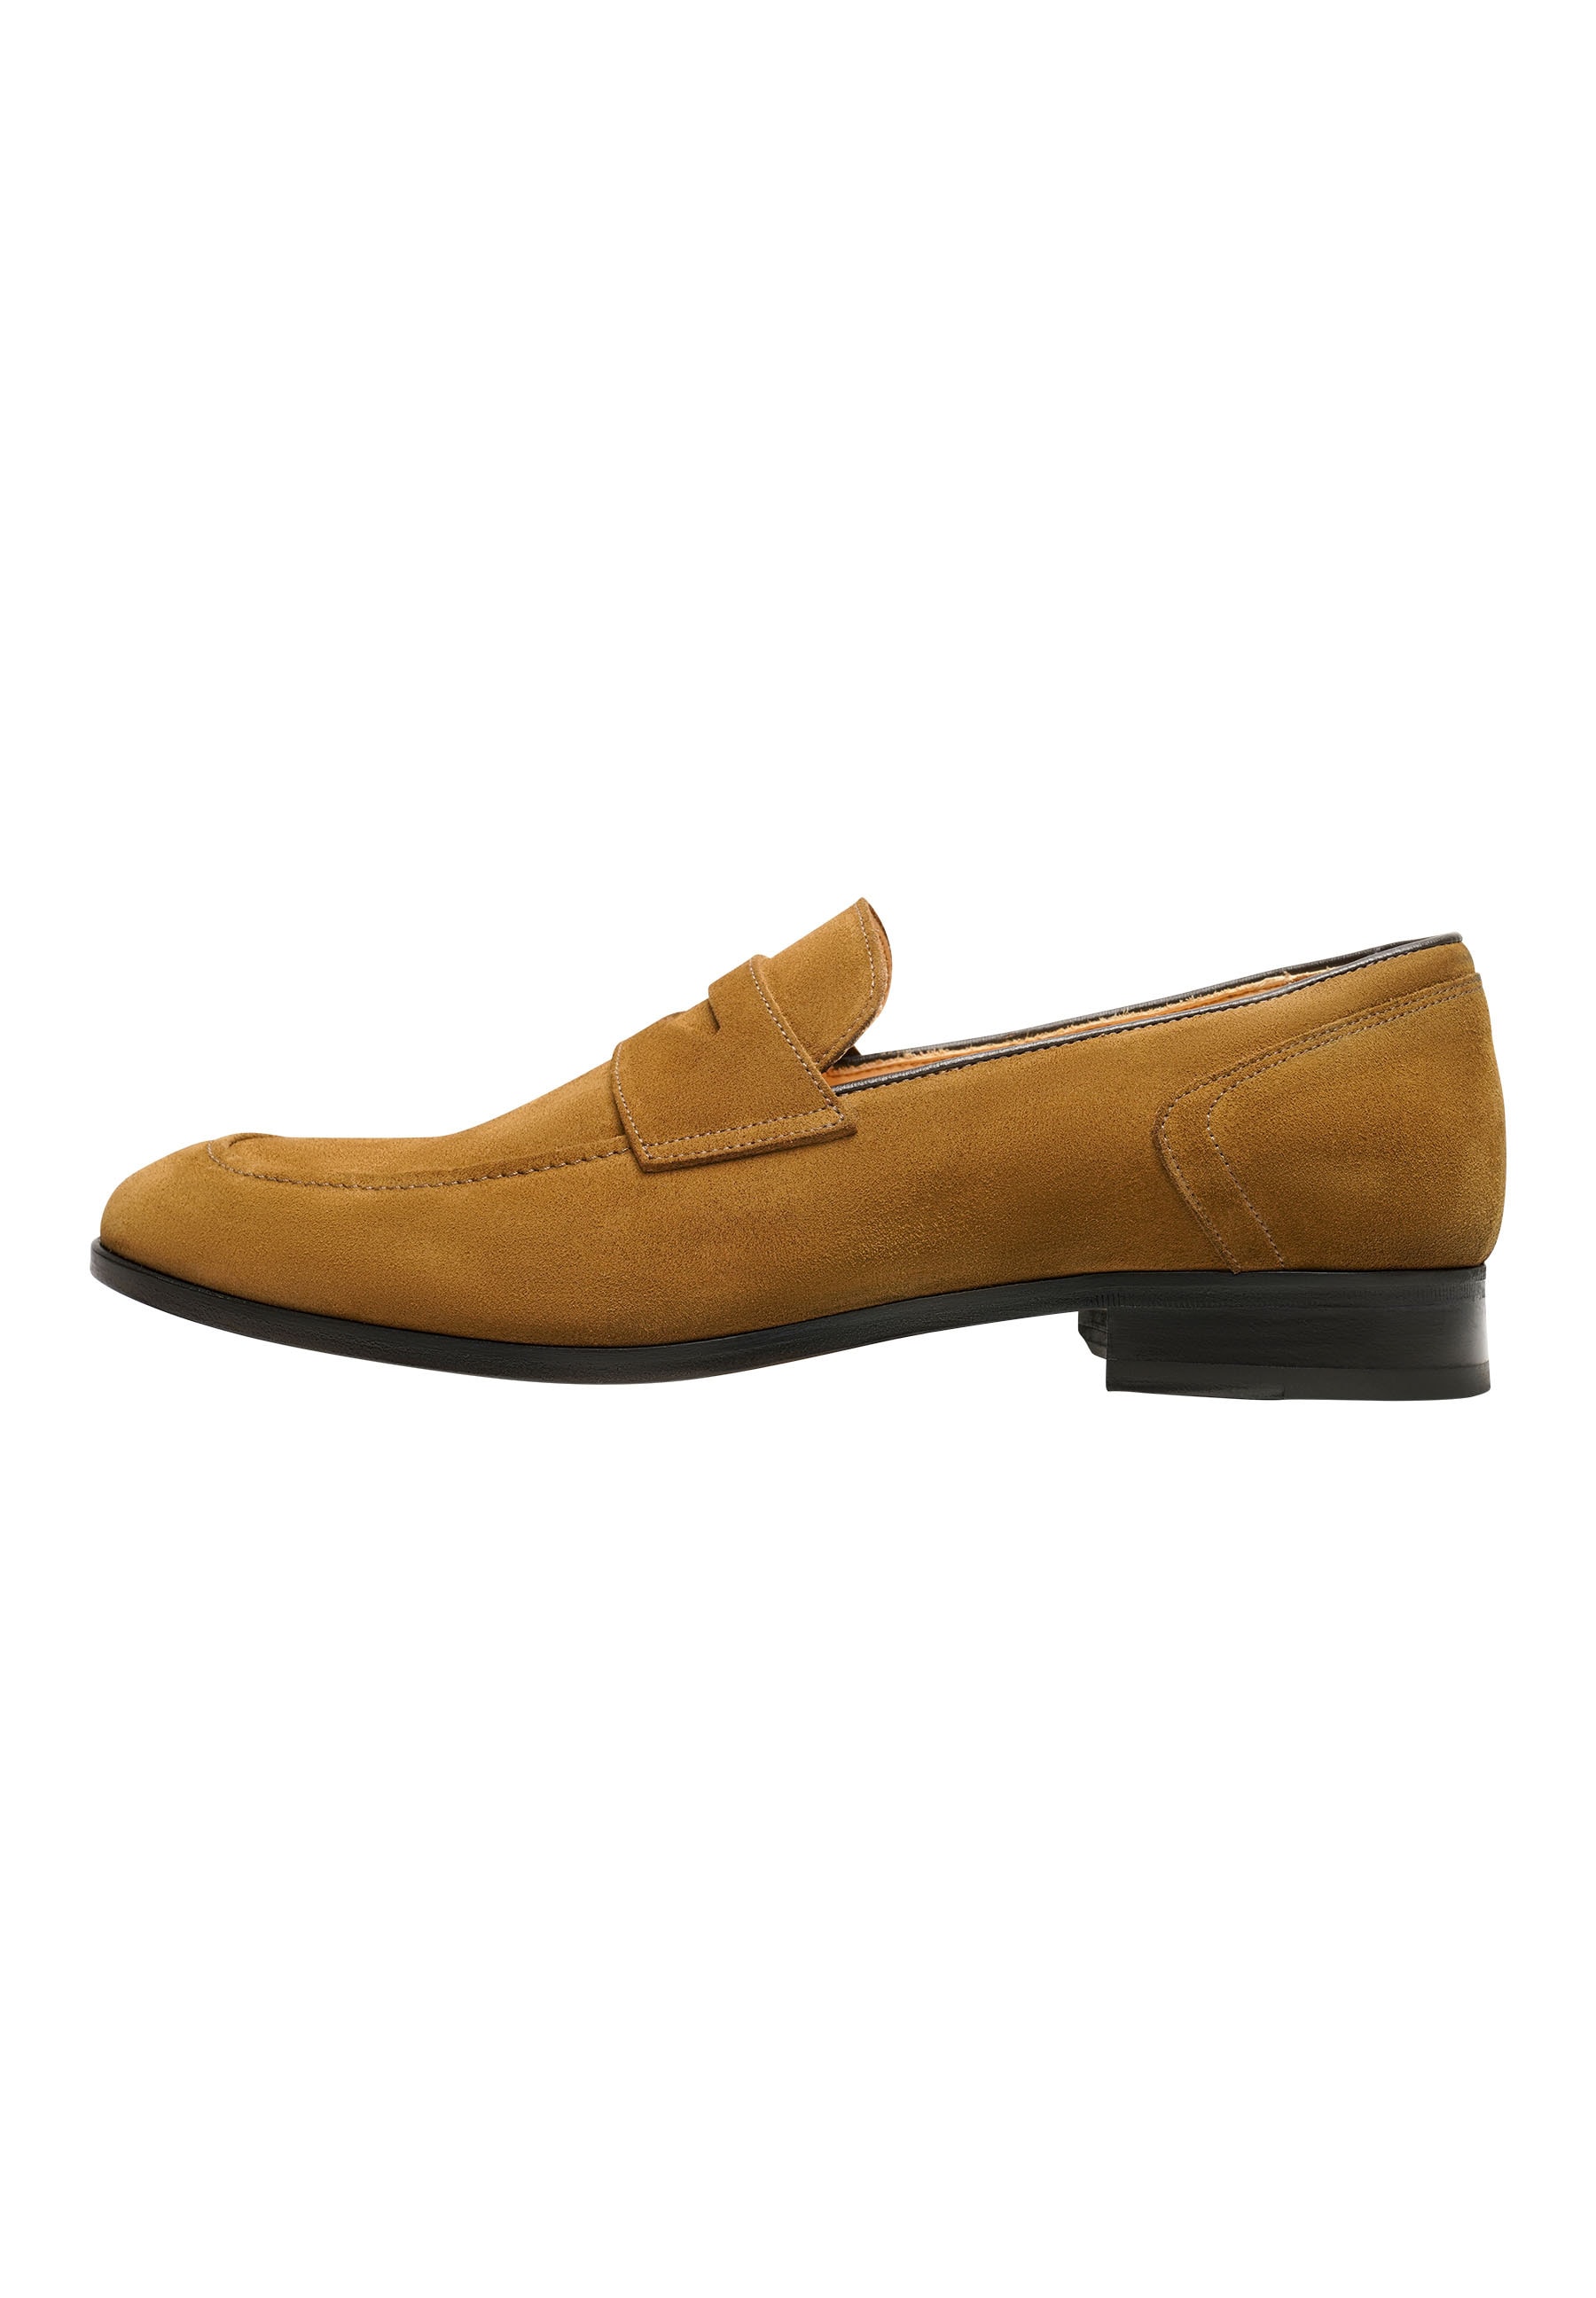 henry stevens -  Loafer "Murray PL",  by Shoepassion